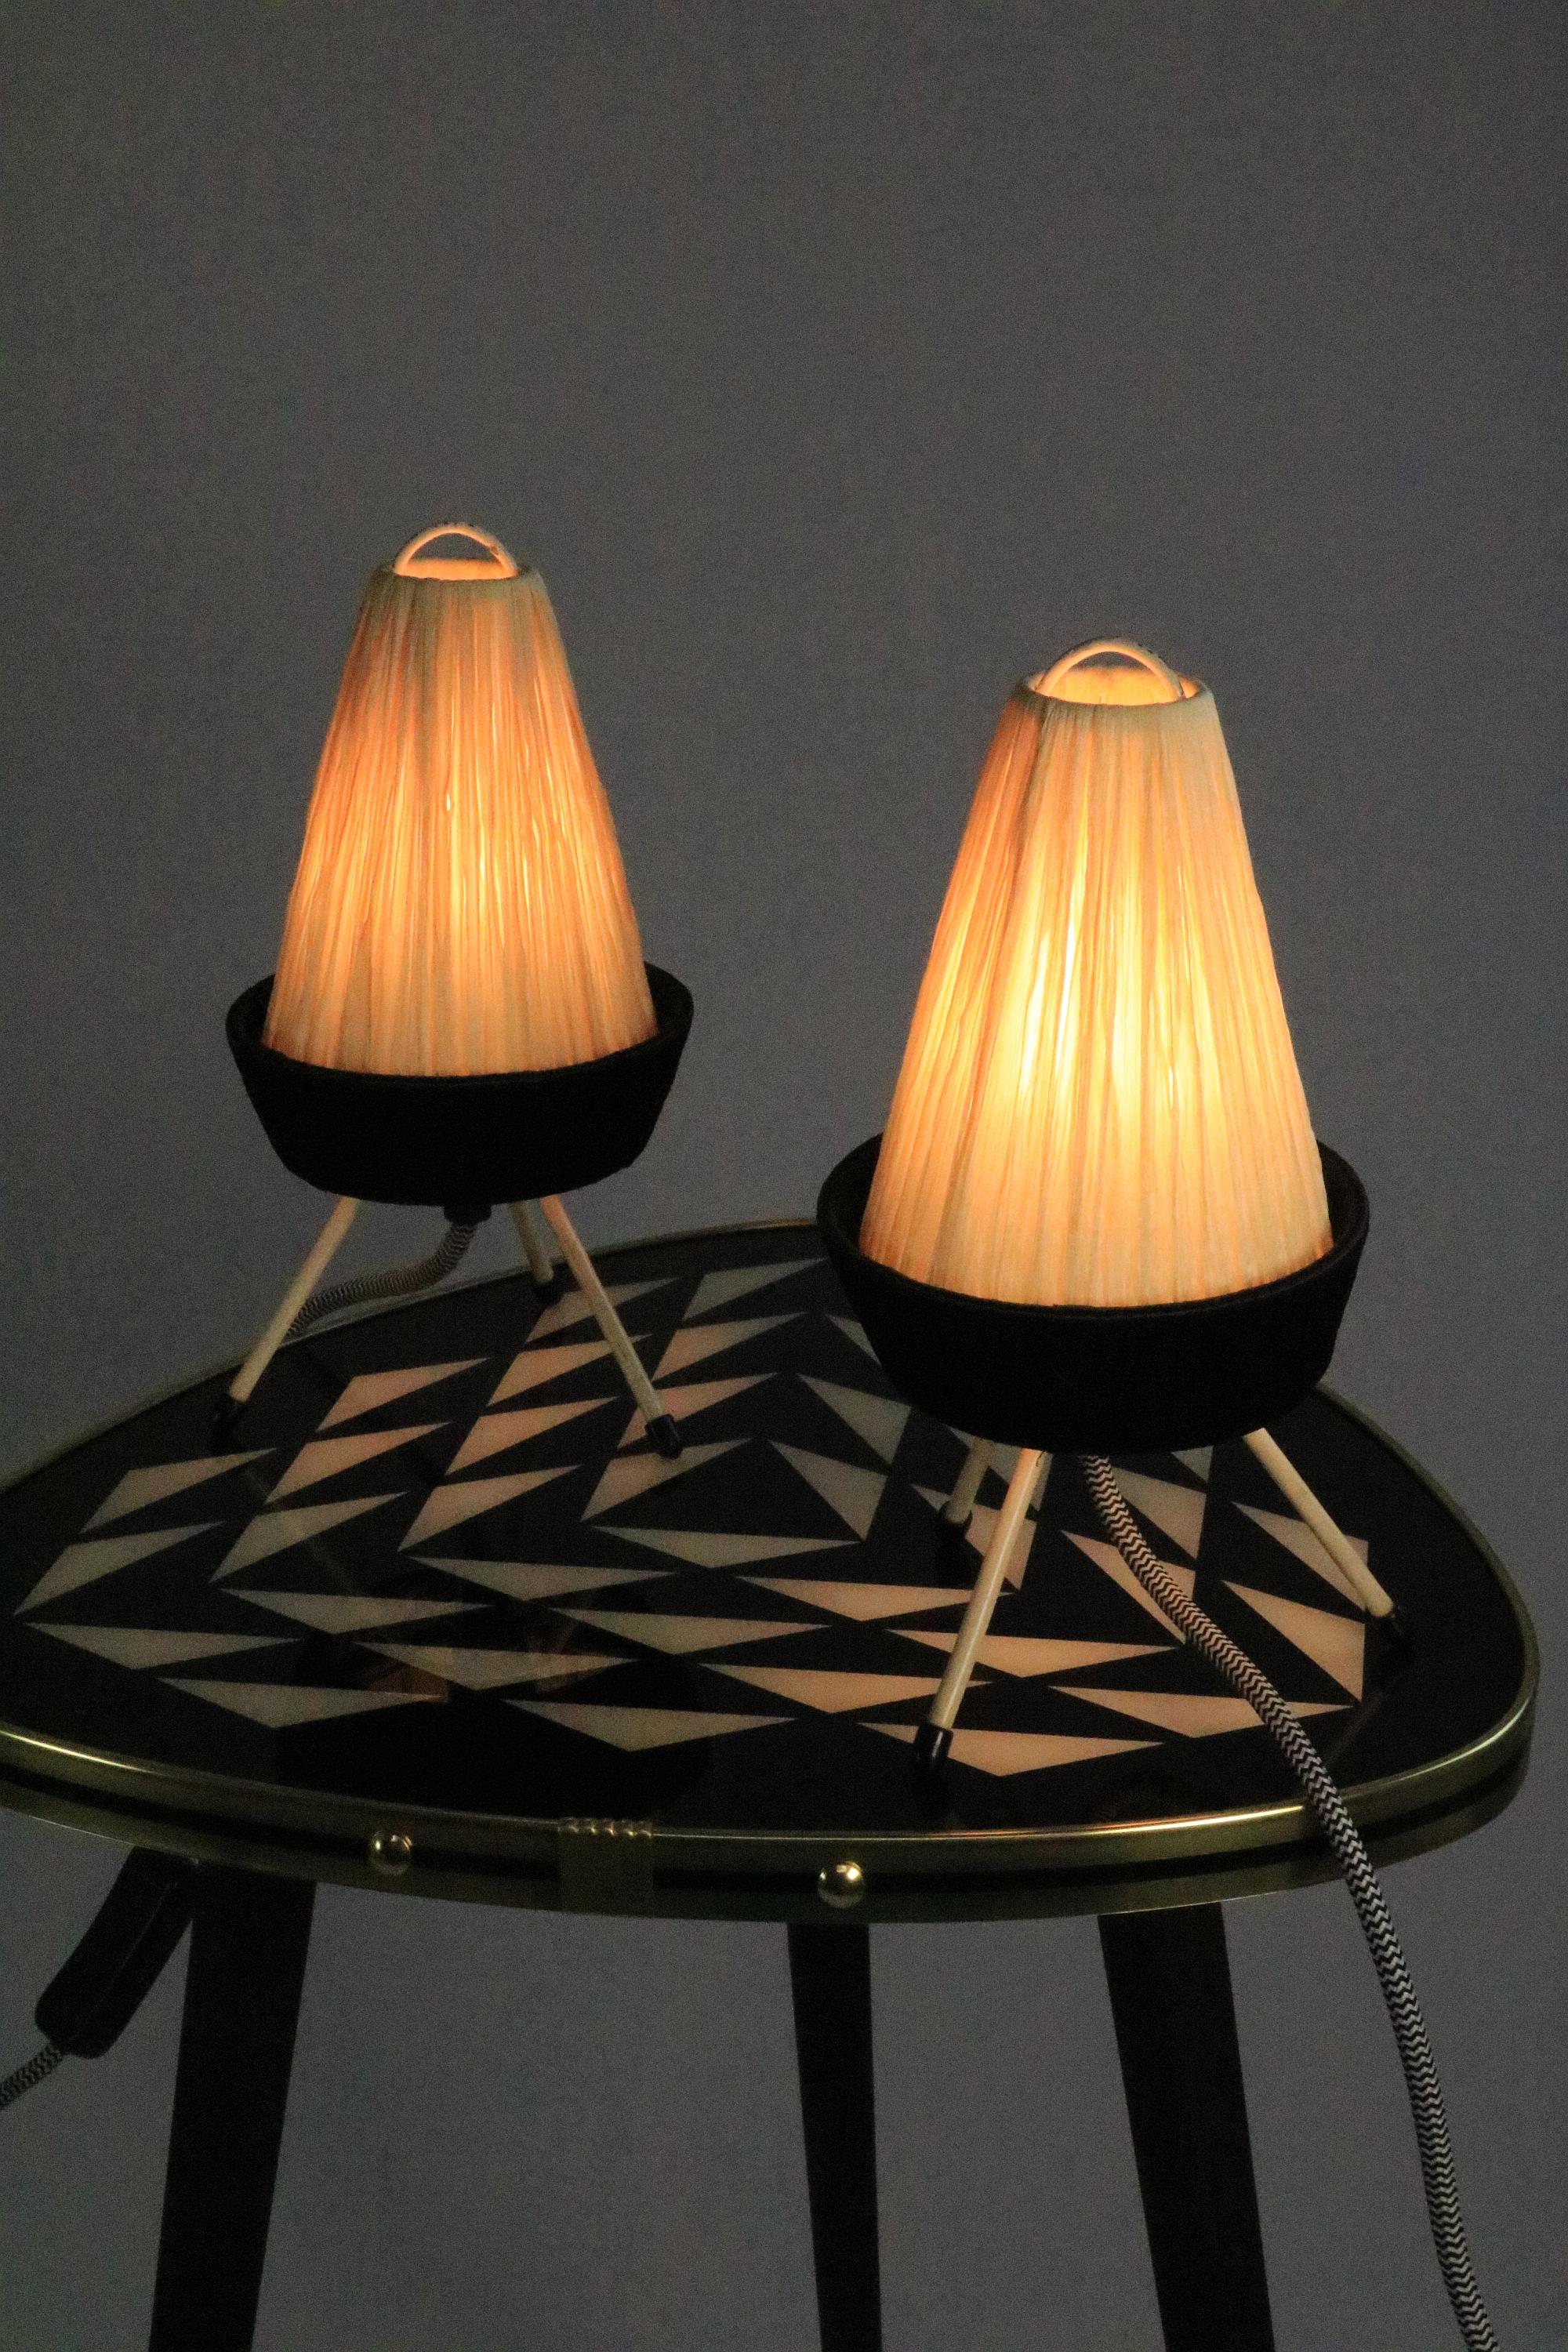 Set of 2 Filigree Table Lamps, Raffia Shade, Germany, Tripod, 1950s For Sale 2